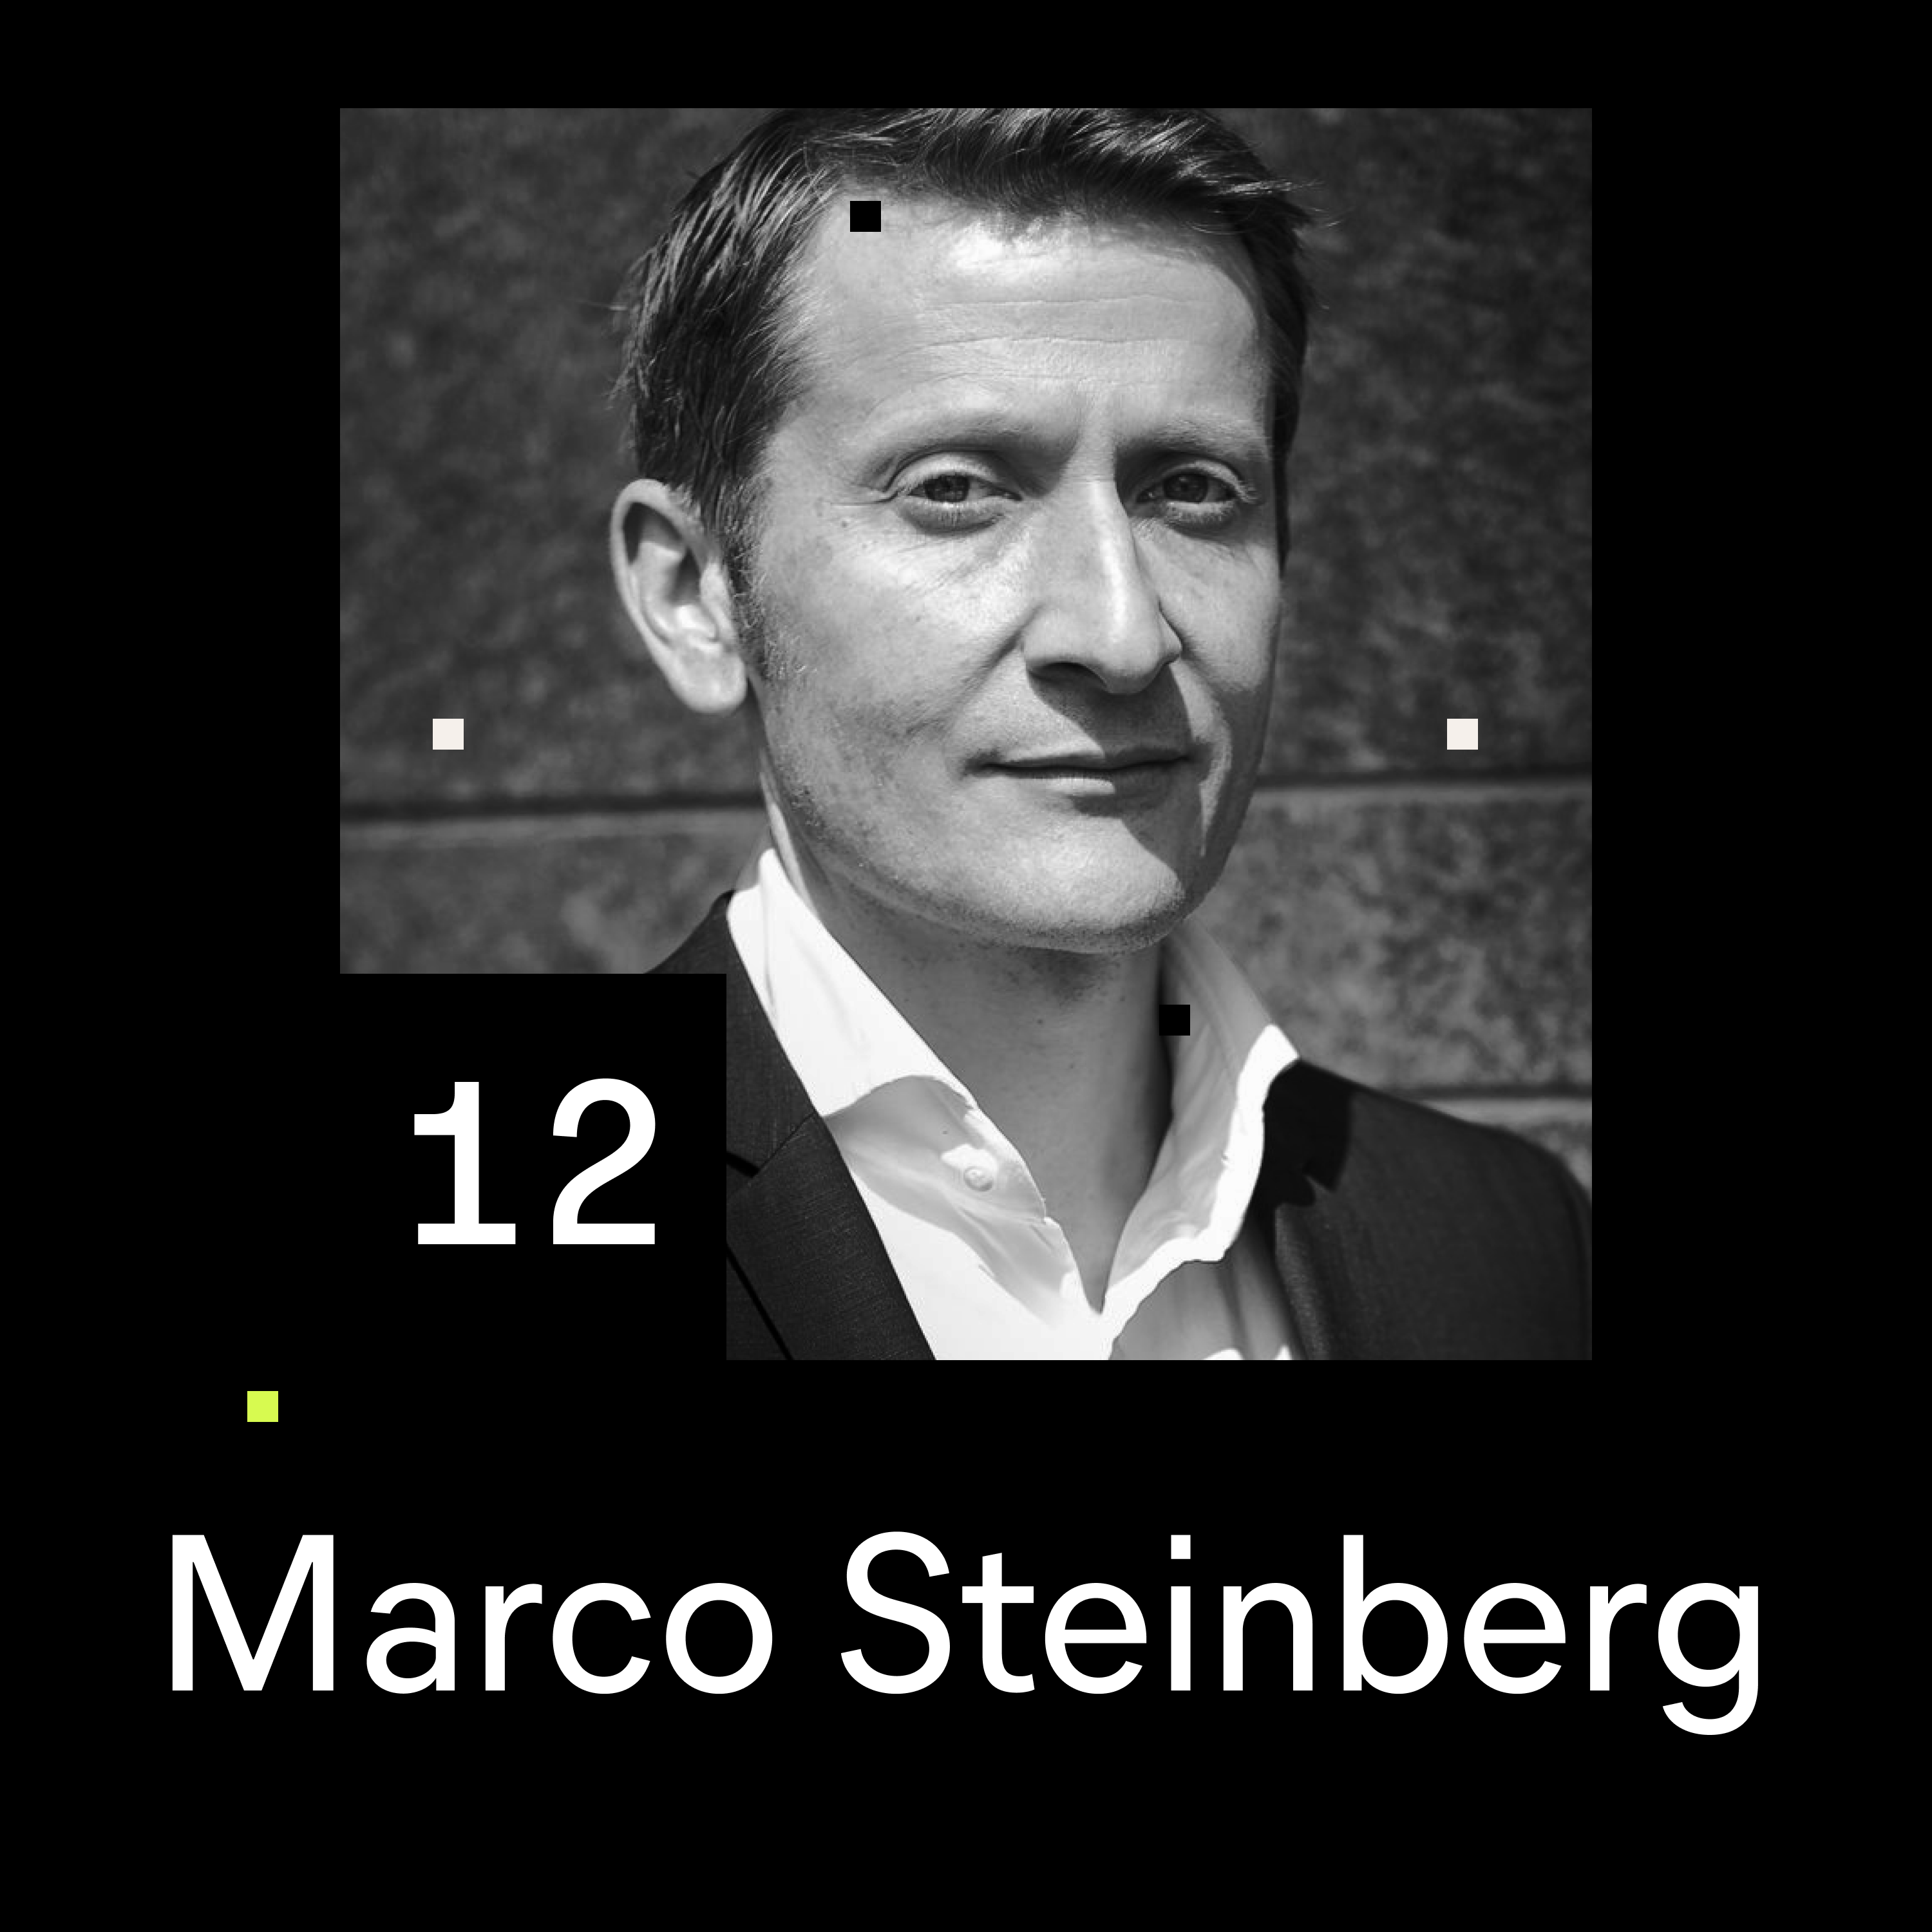 Black and white portrait of Marco Steinberg for the 12th episode of the Shaping Chaos podcast